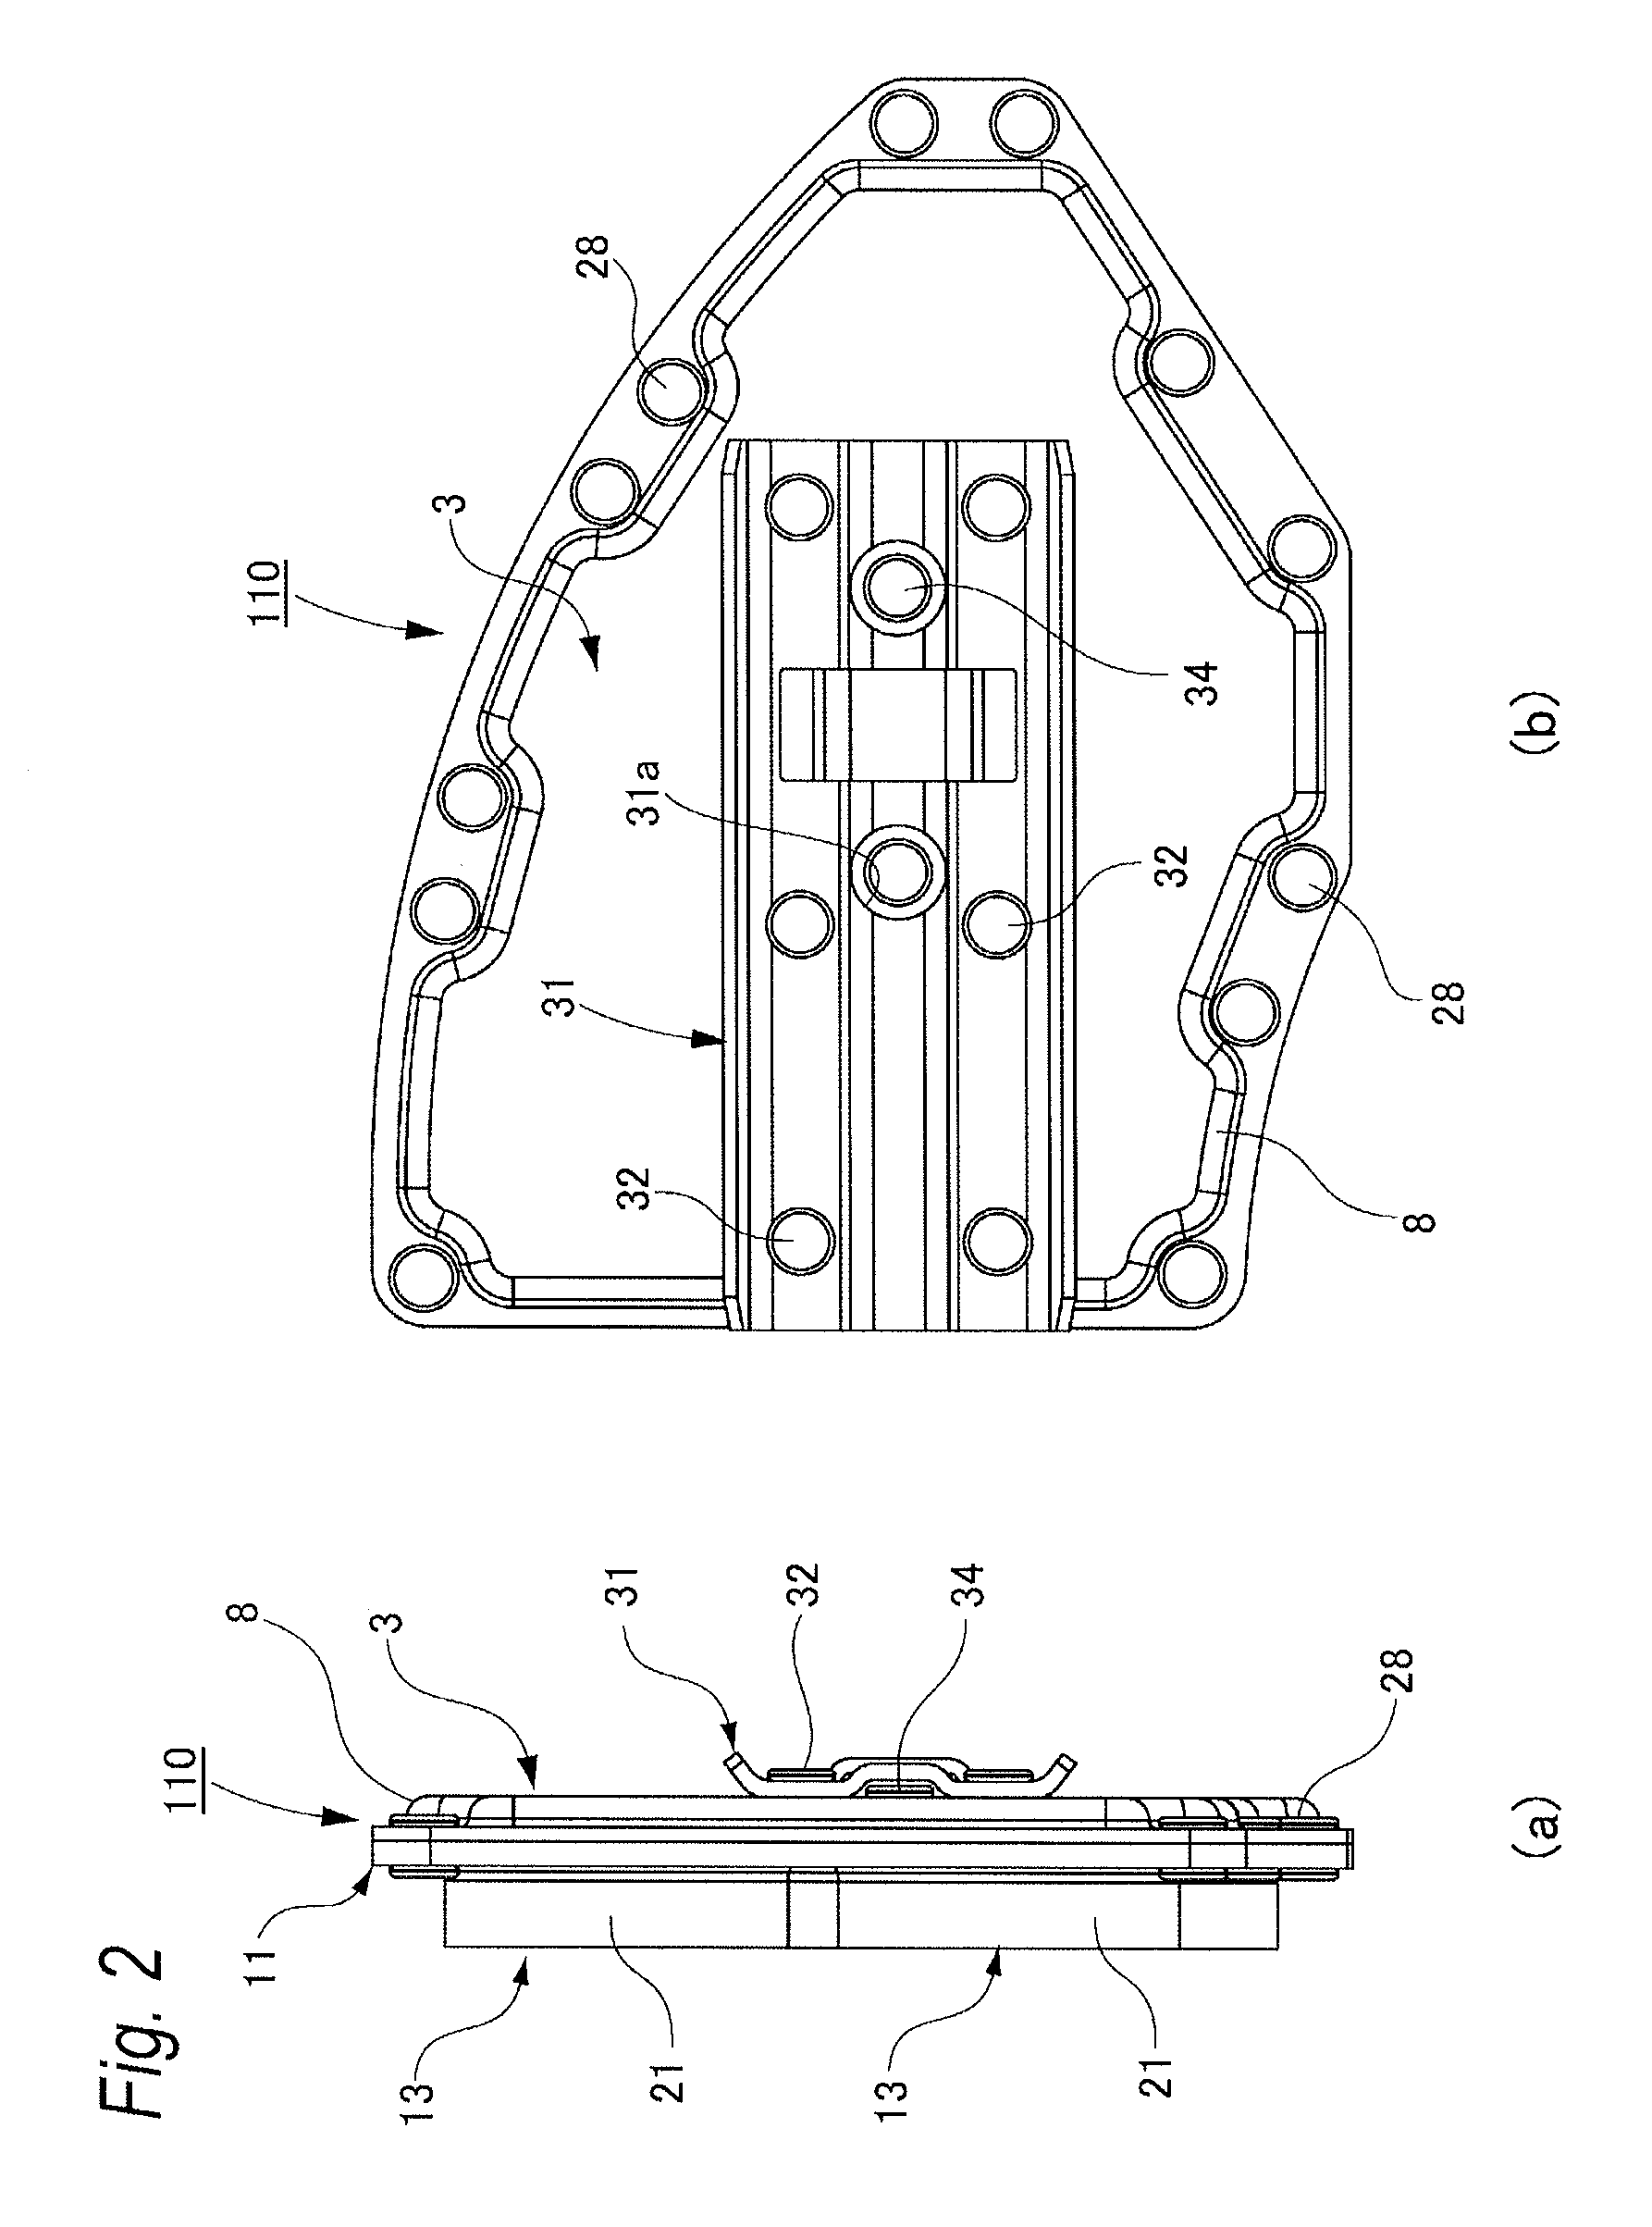 Friction pad assembly for disk brake